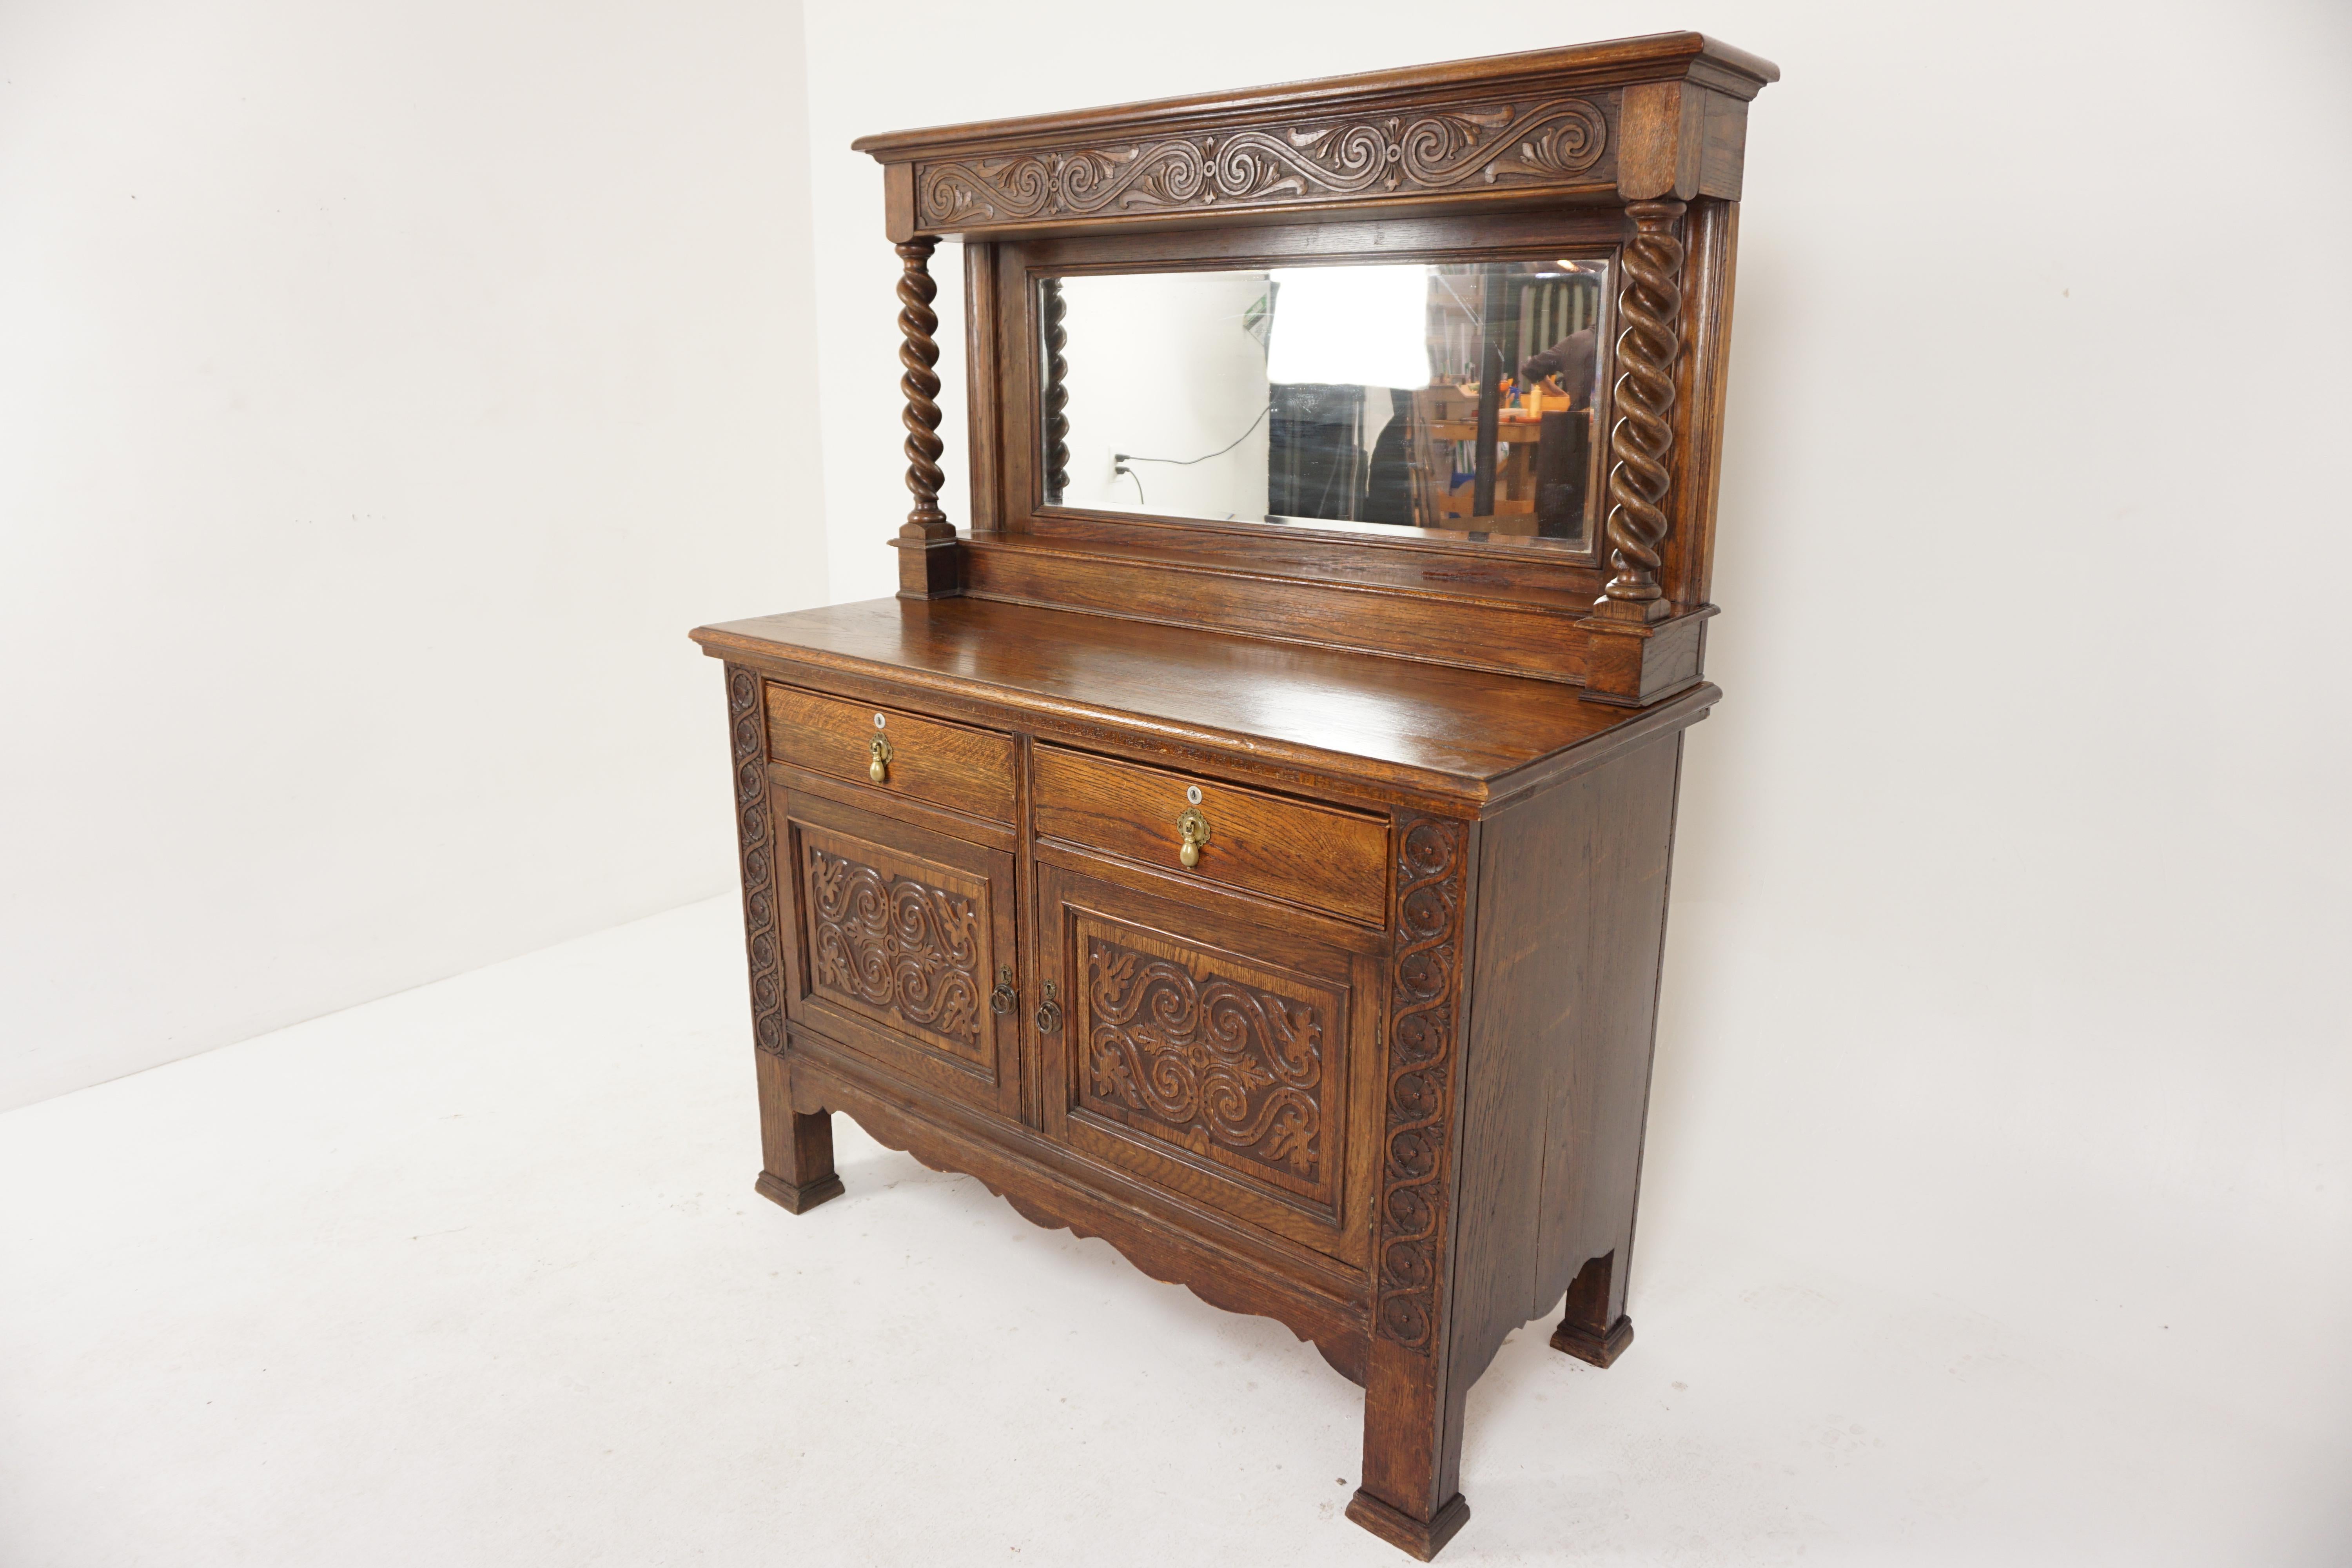 Antique barley twist oak mirror back sideboard, buffet, Scotland 1910, H390

Scotland 1910
Solid oak
Original finish
The sideboard comes into two pieces - the top and the base
The top has a carved cornice with a pair of thick barley twist columns on